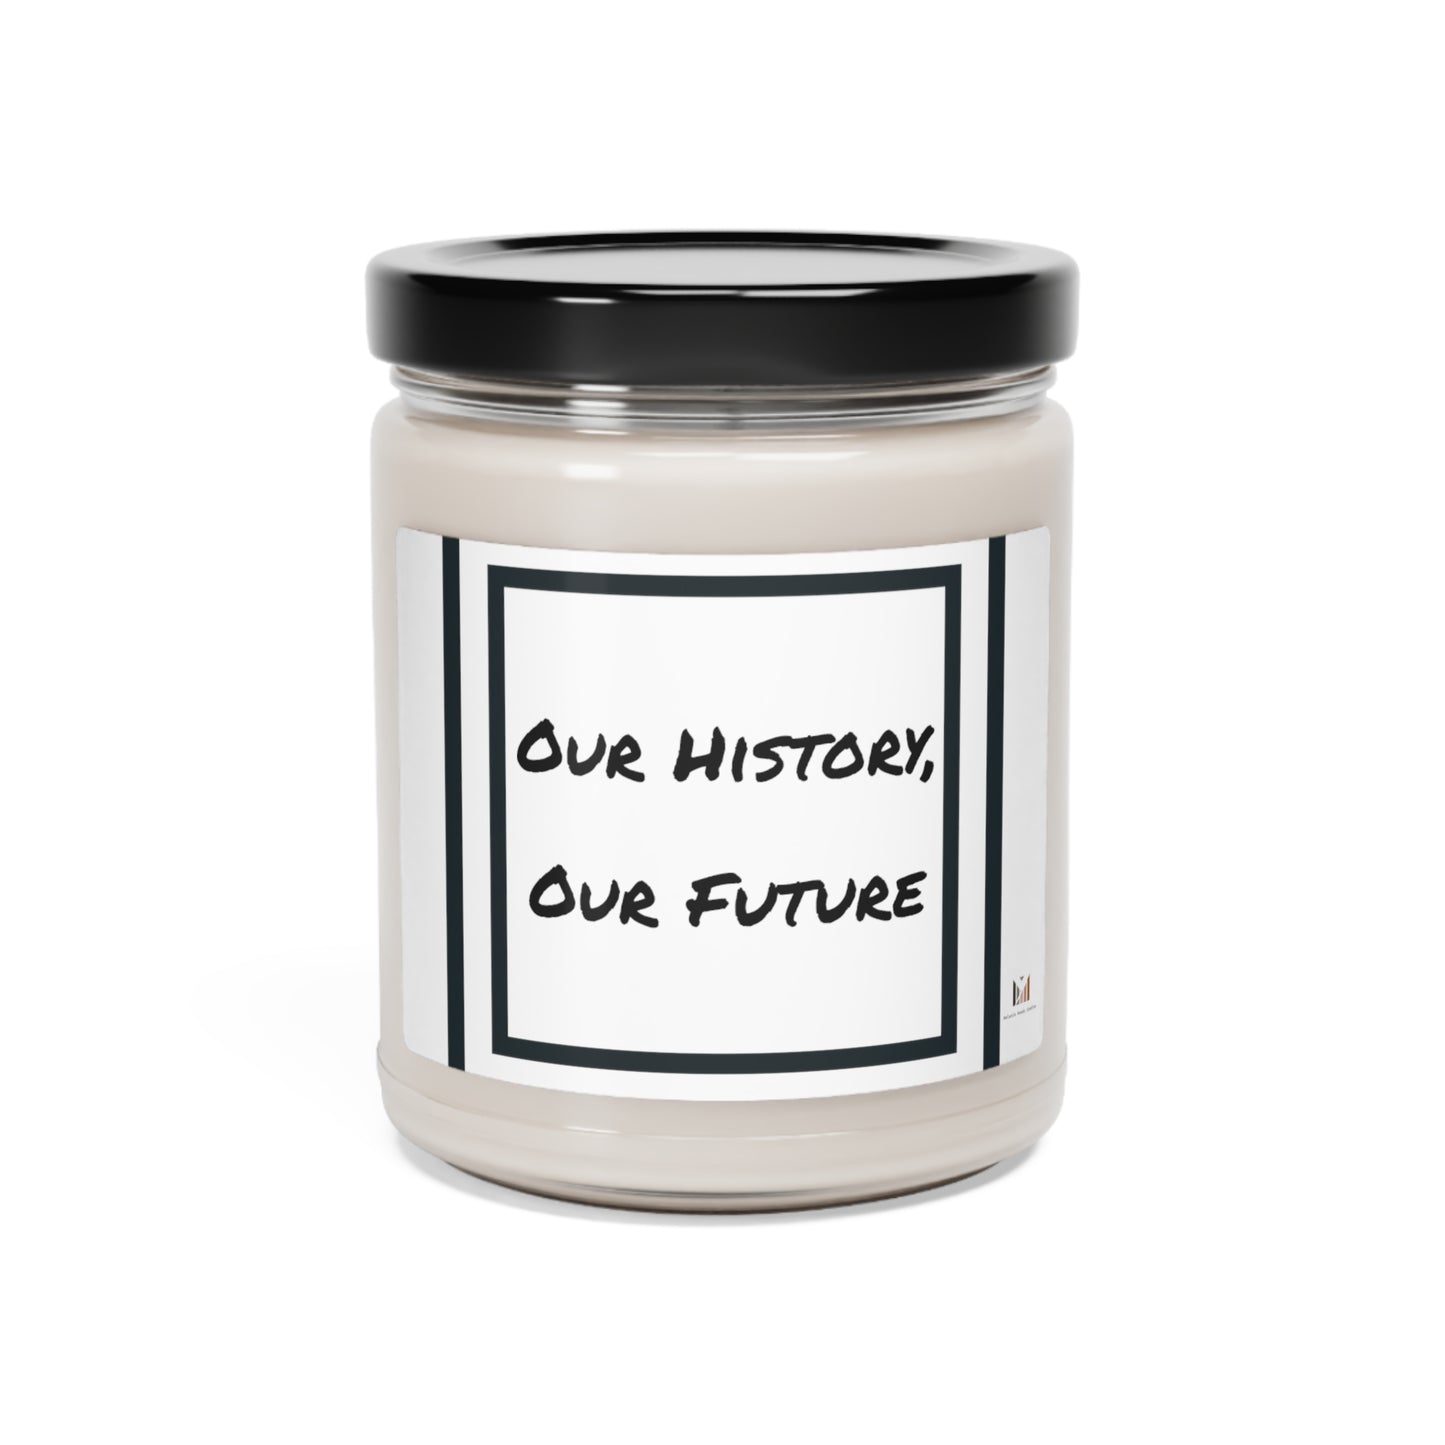 "Our History" Scented Soy Candle, 9oz